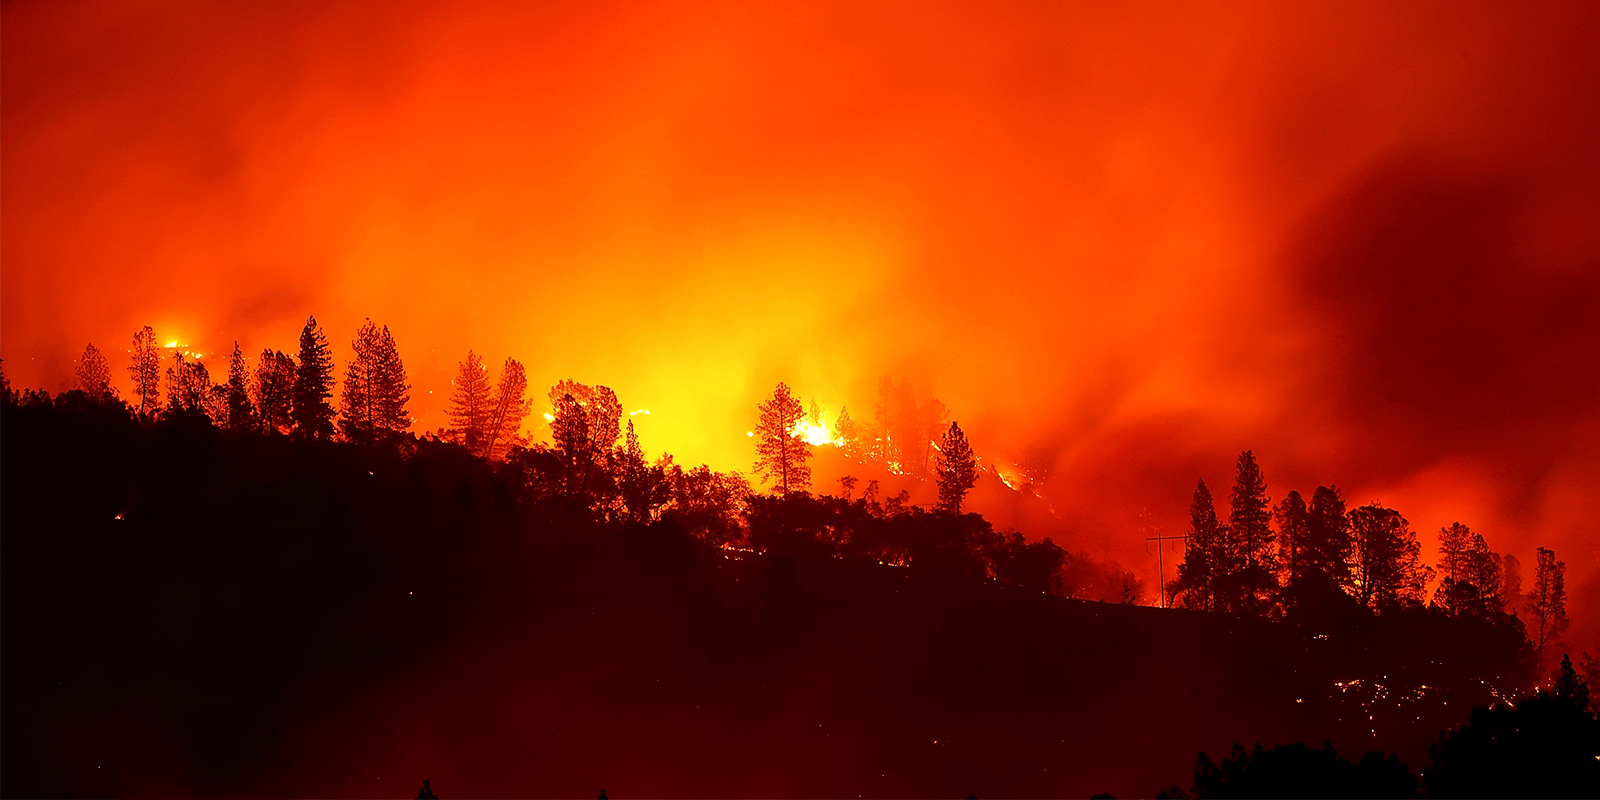 Trees burning on a hillside engulfed in flames